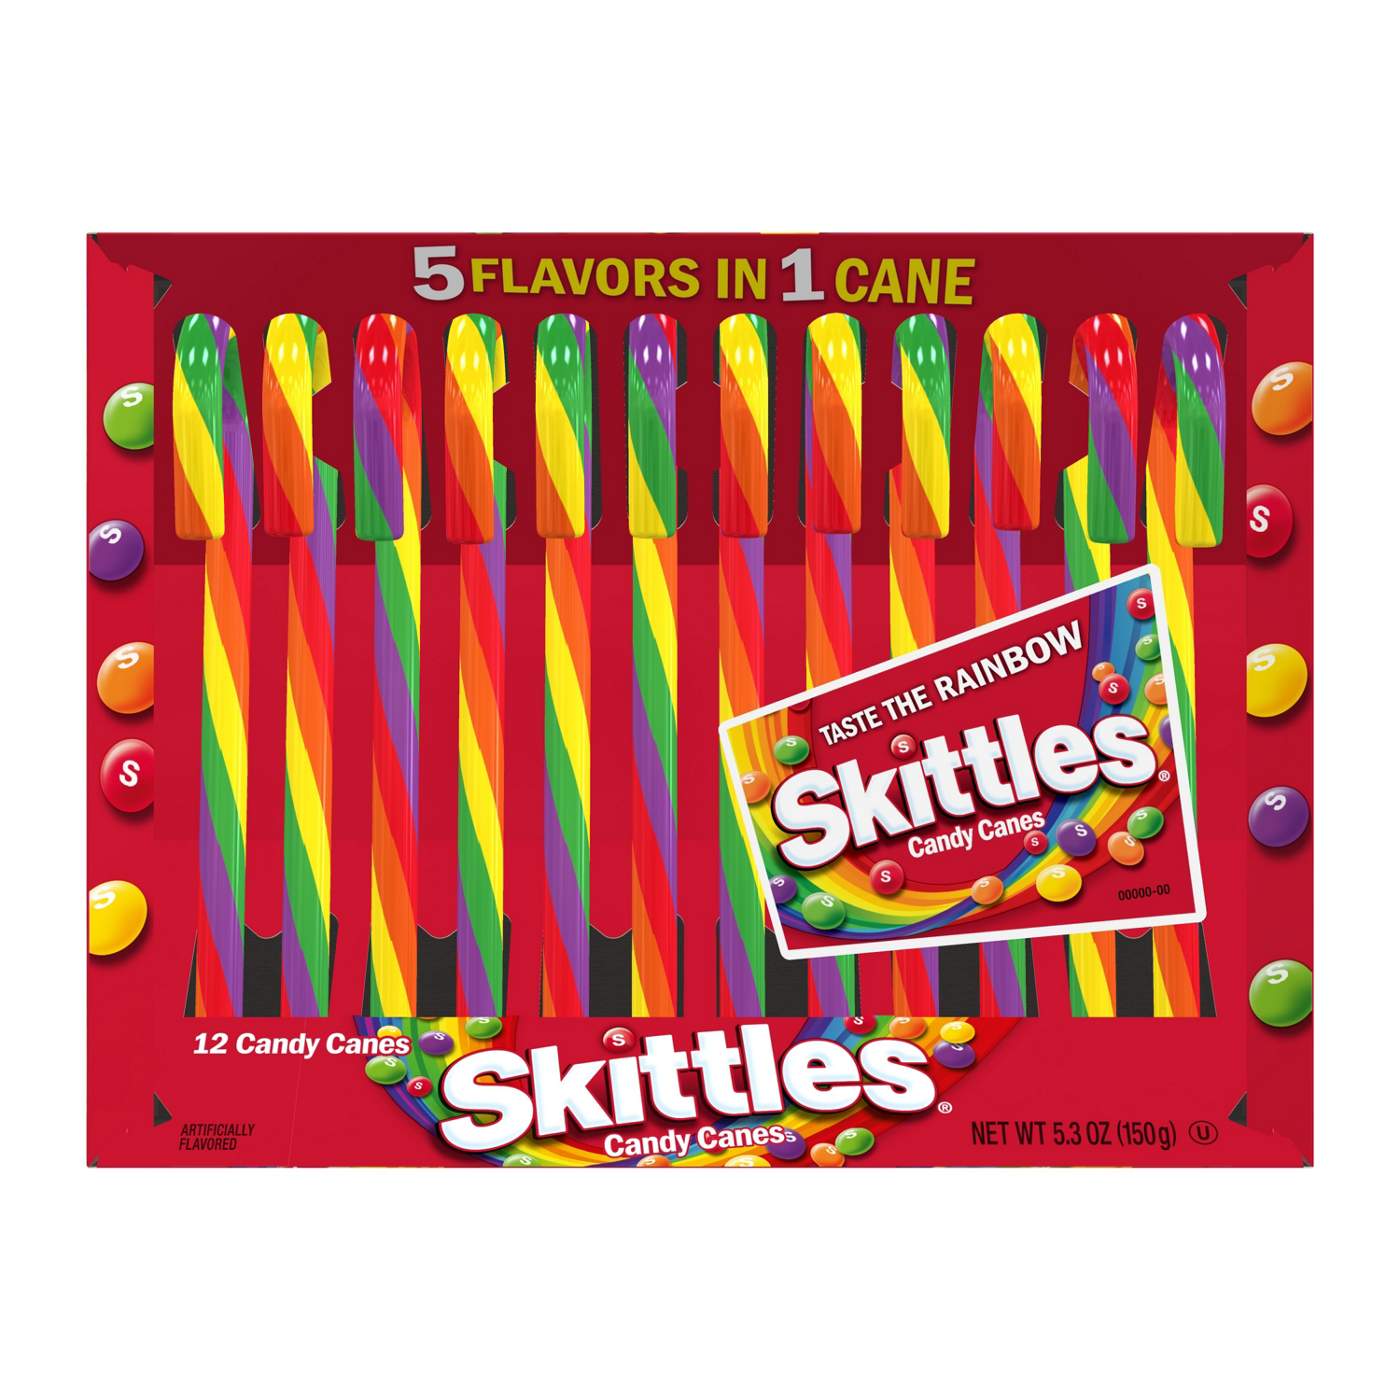 Skittles Holiday Candy Canes; image 1 of 2